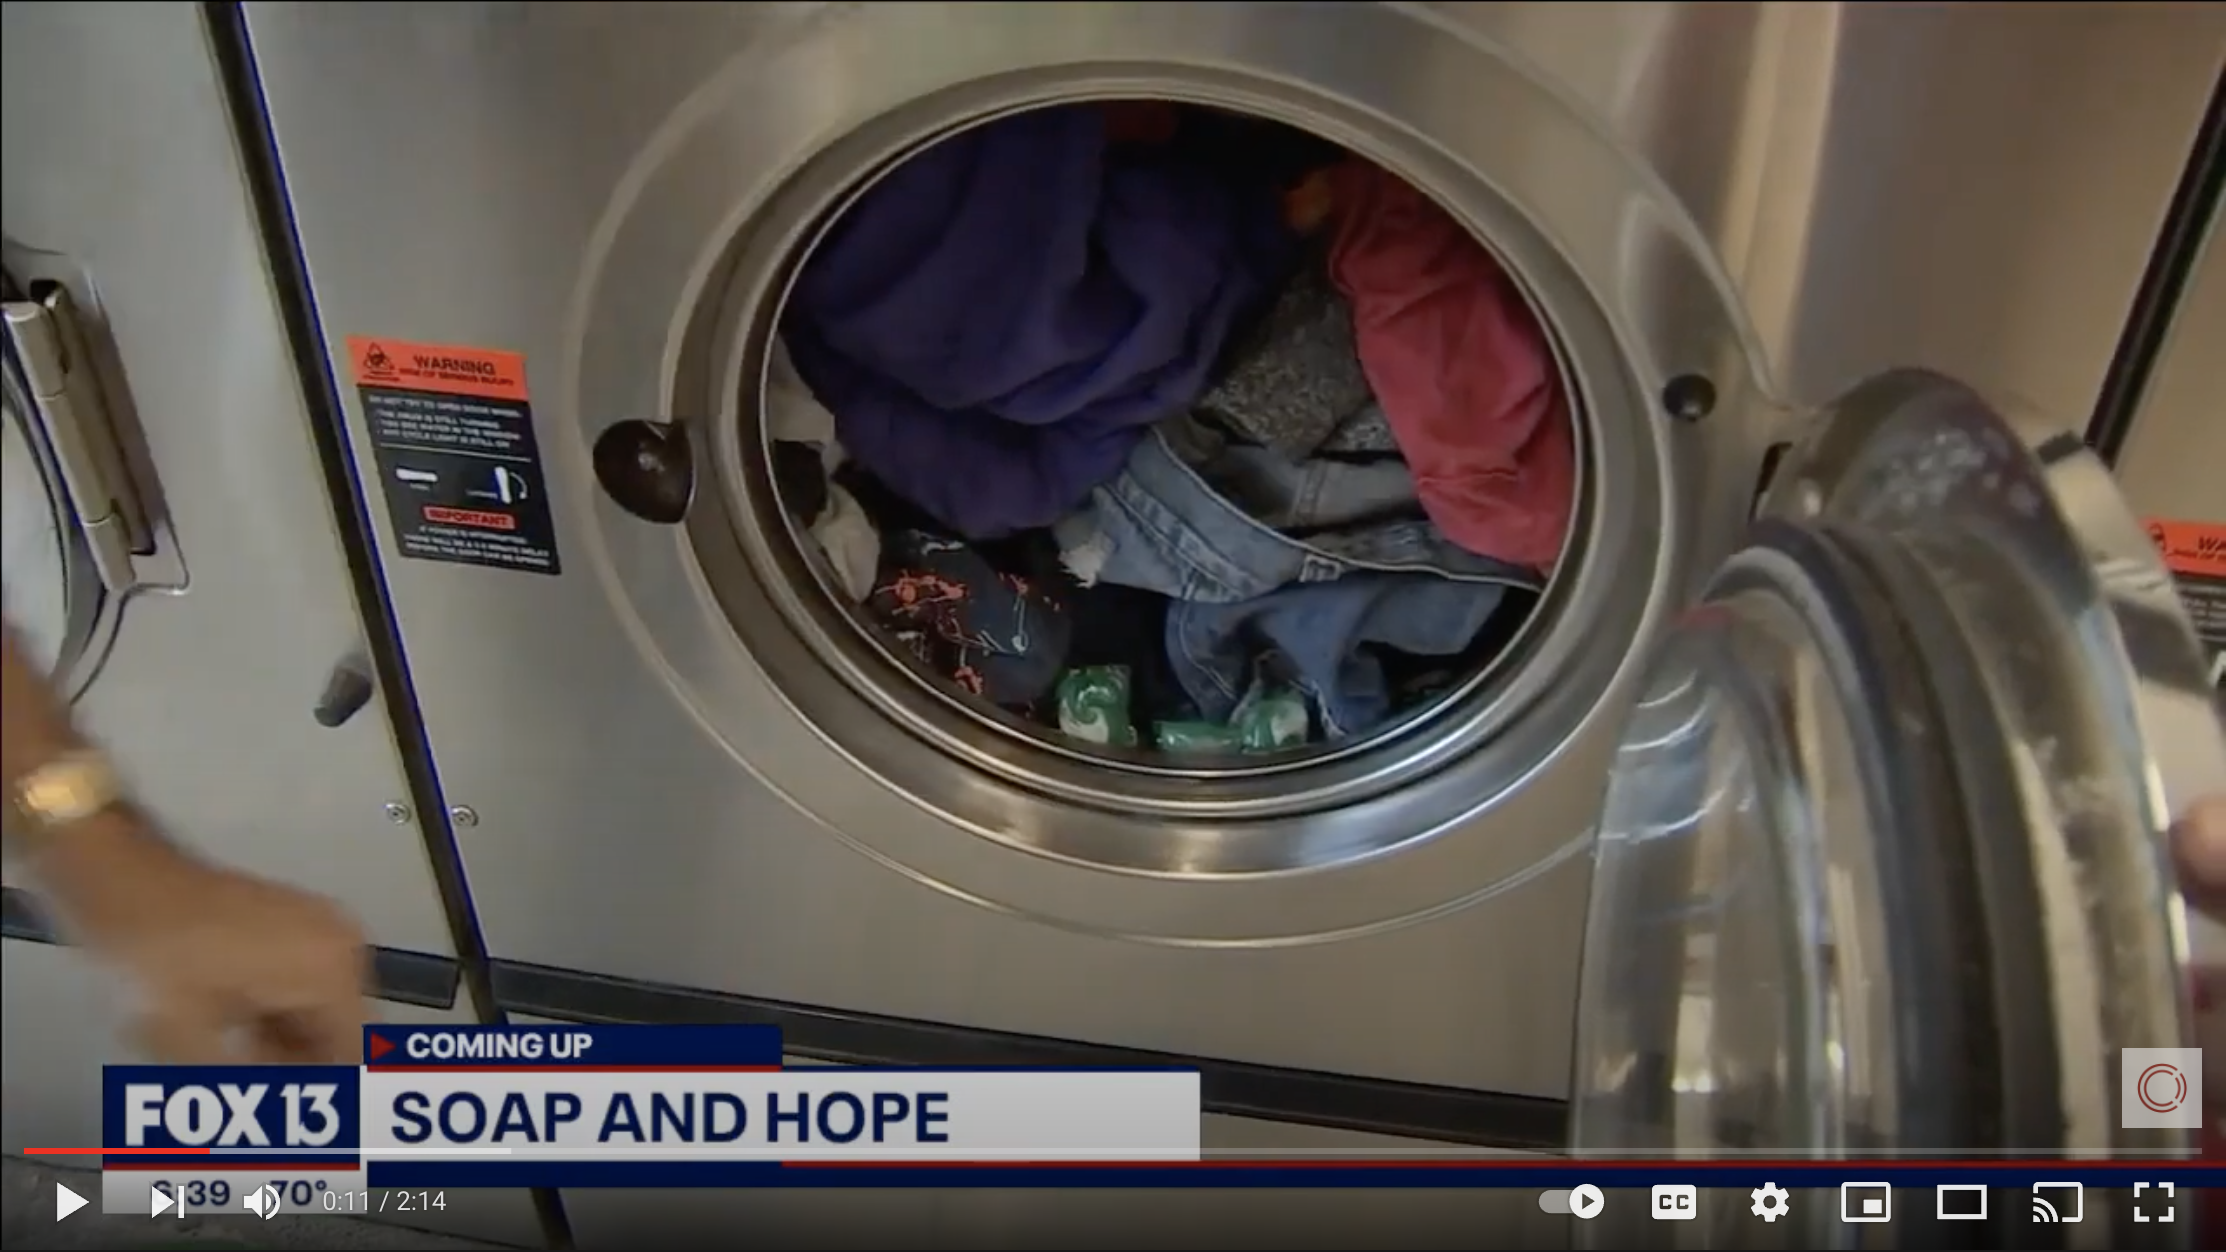 Fox 13 Tampa Bay – Laundry Project x SPPD Story 2